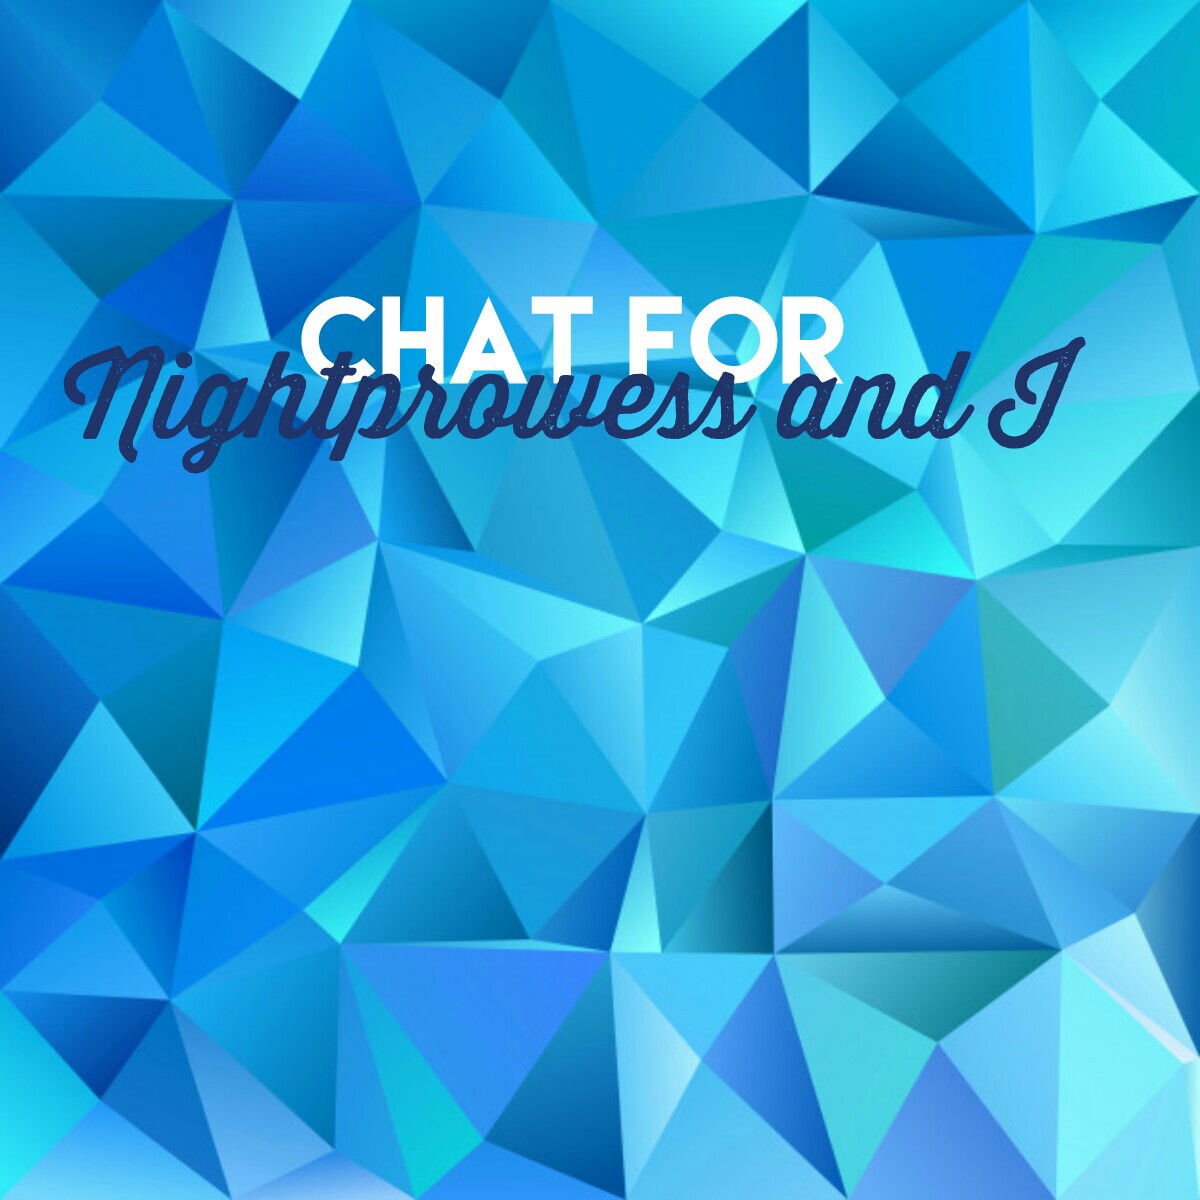 chat for Nightprowess and I